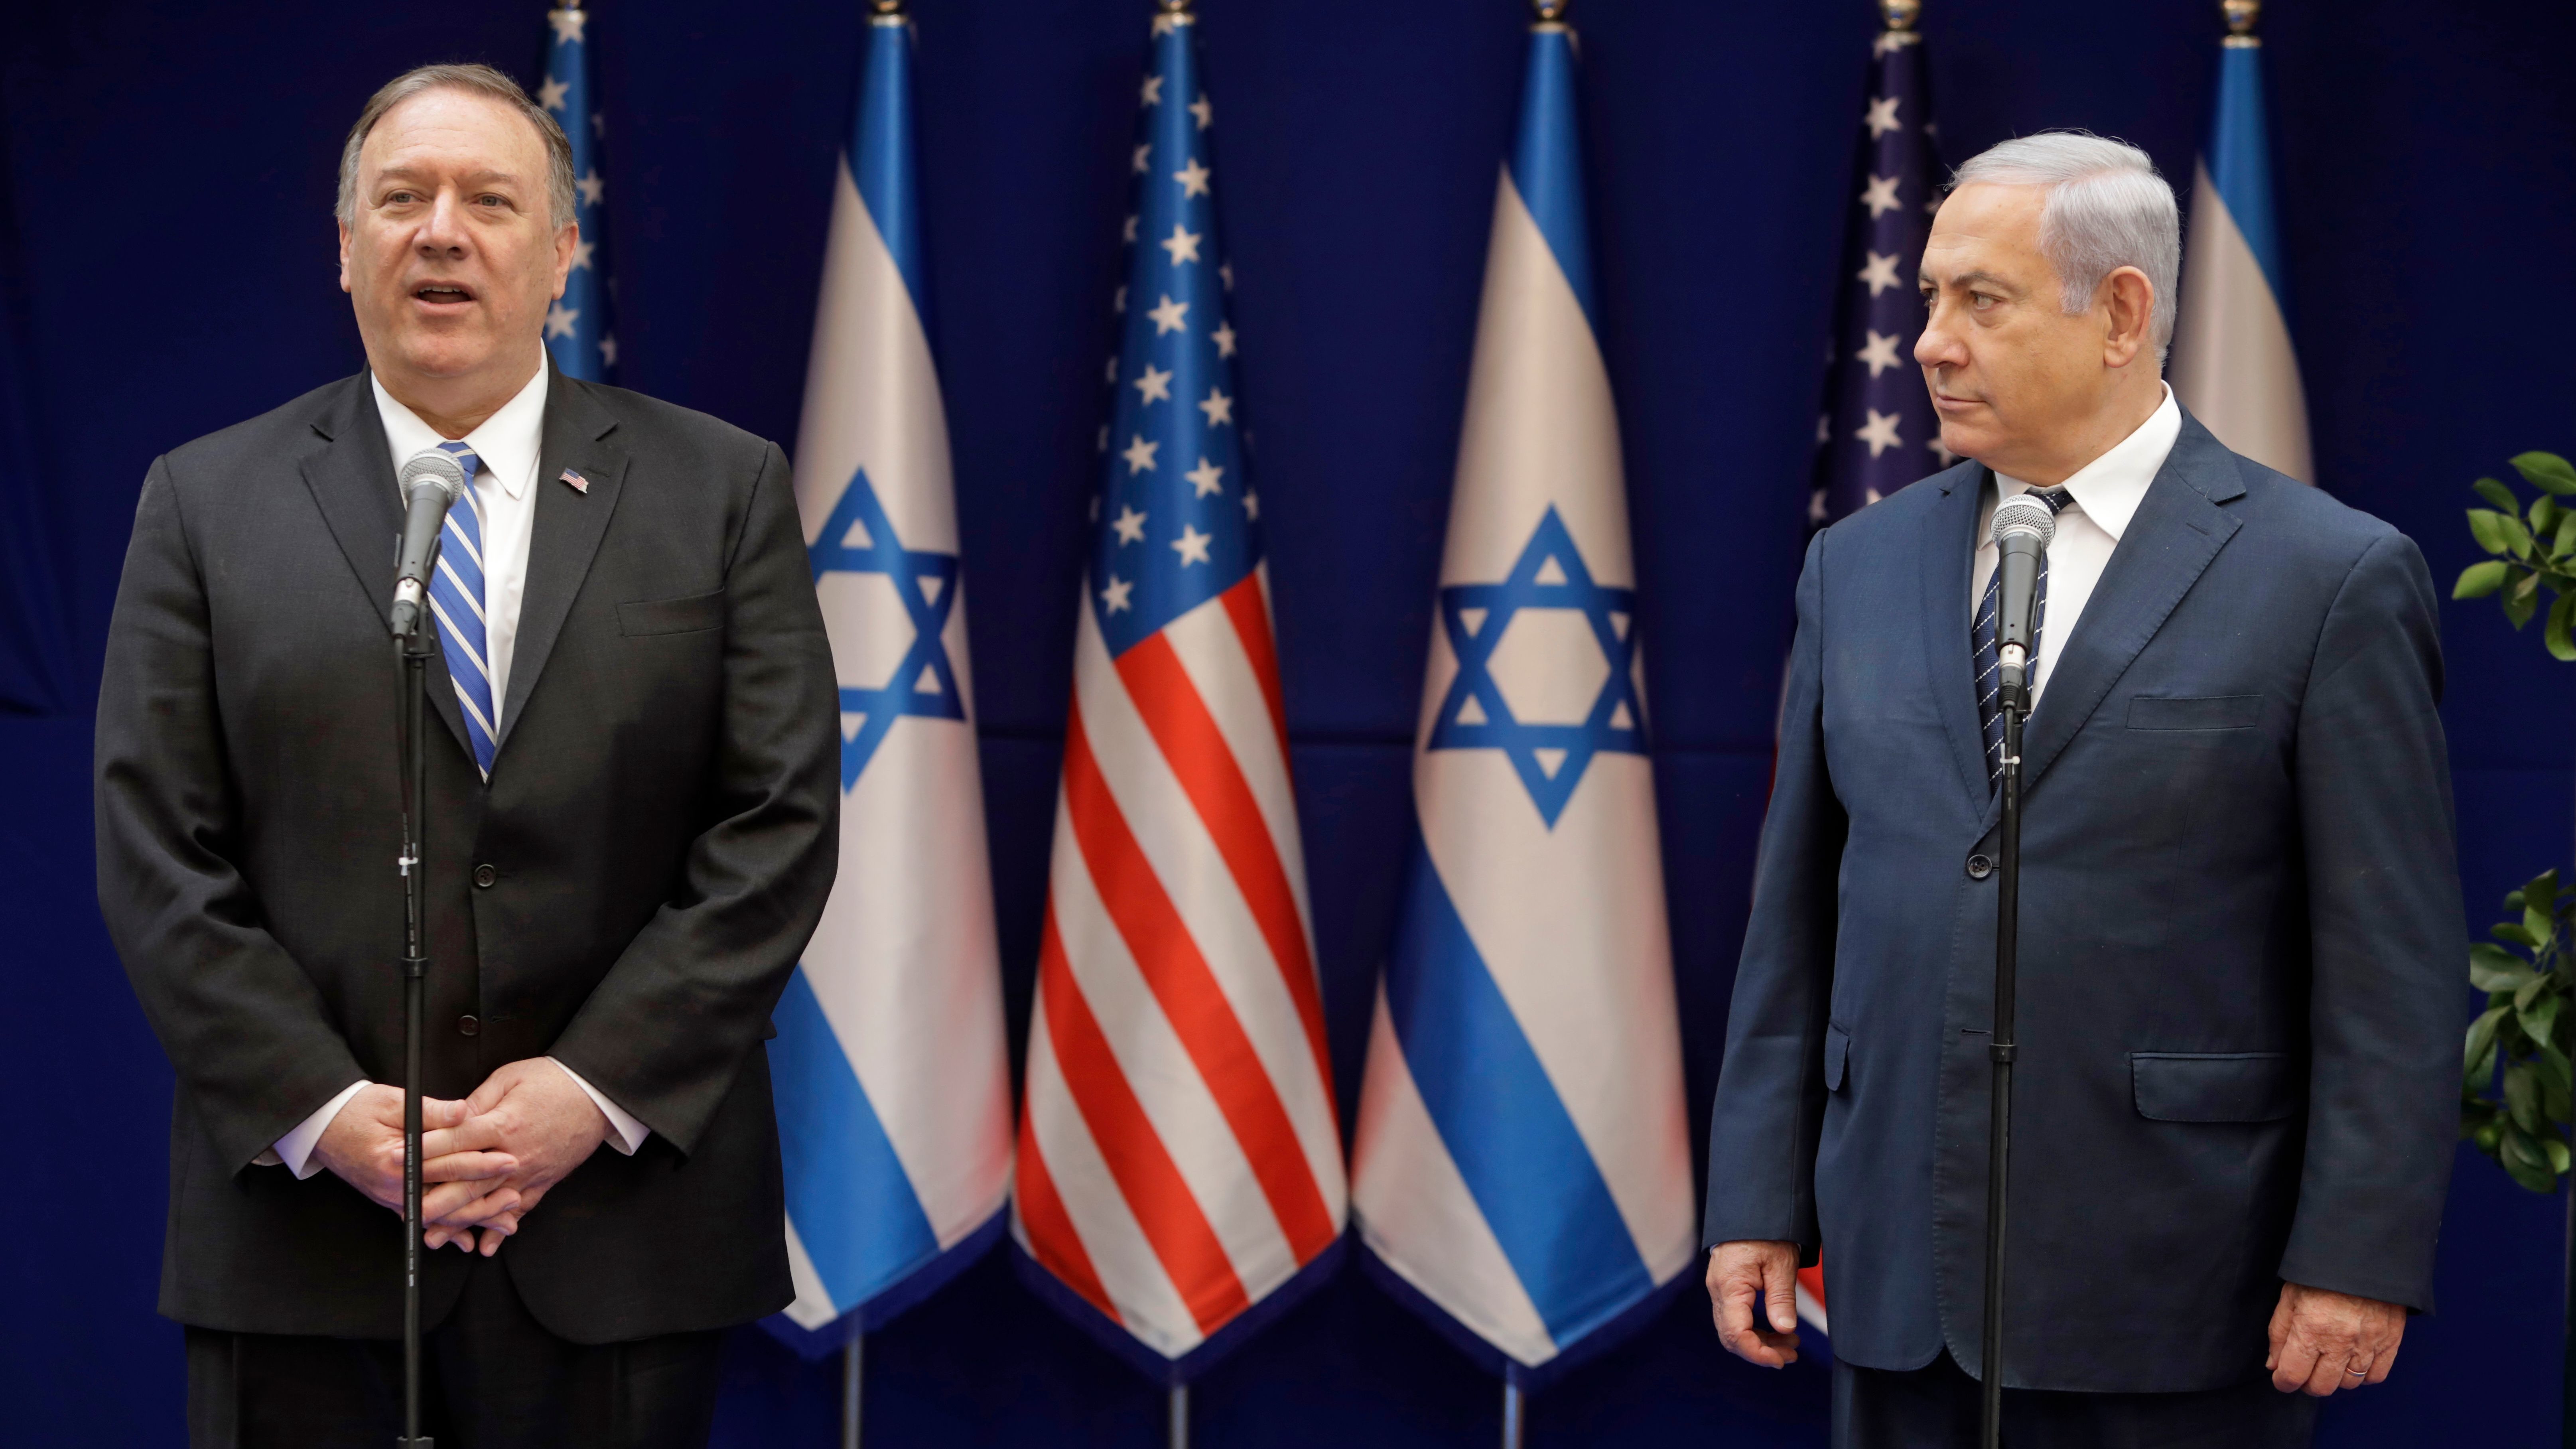 With Syria in Further Turmoil, Pompeo and Netanyahu Talk Iran